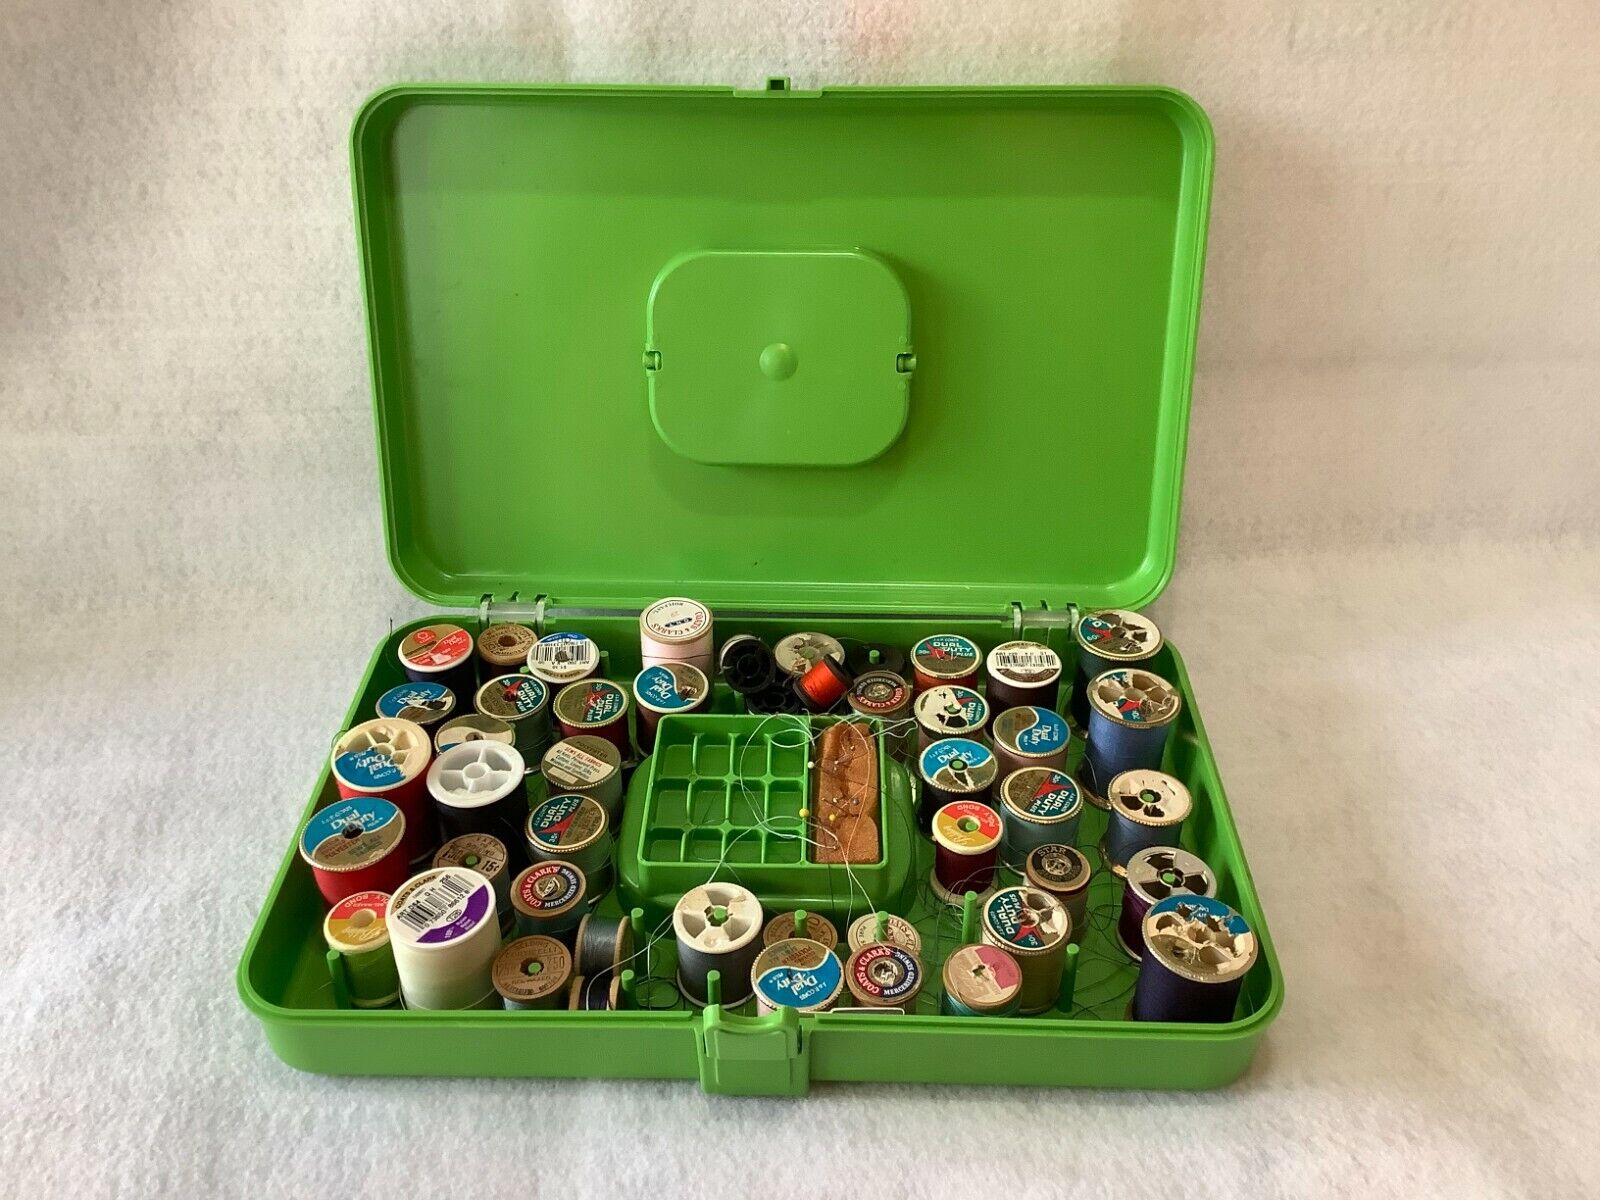 Vintage Plastic Green Sewing Box Complete with Contents, Vintage Thread Retro